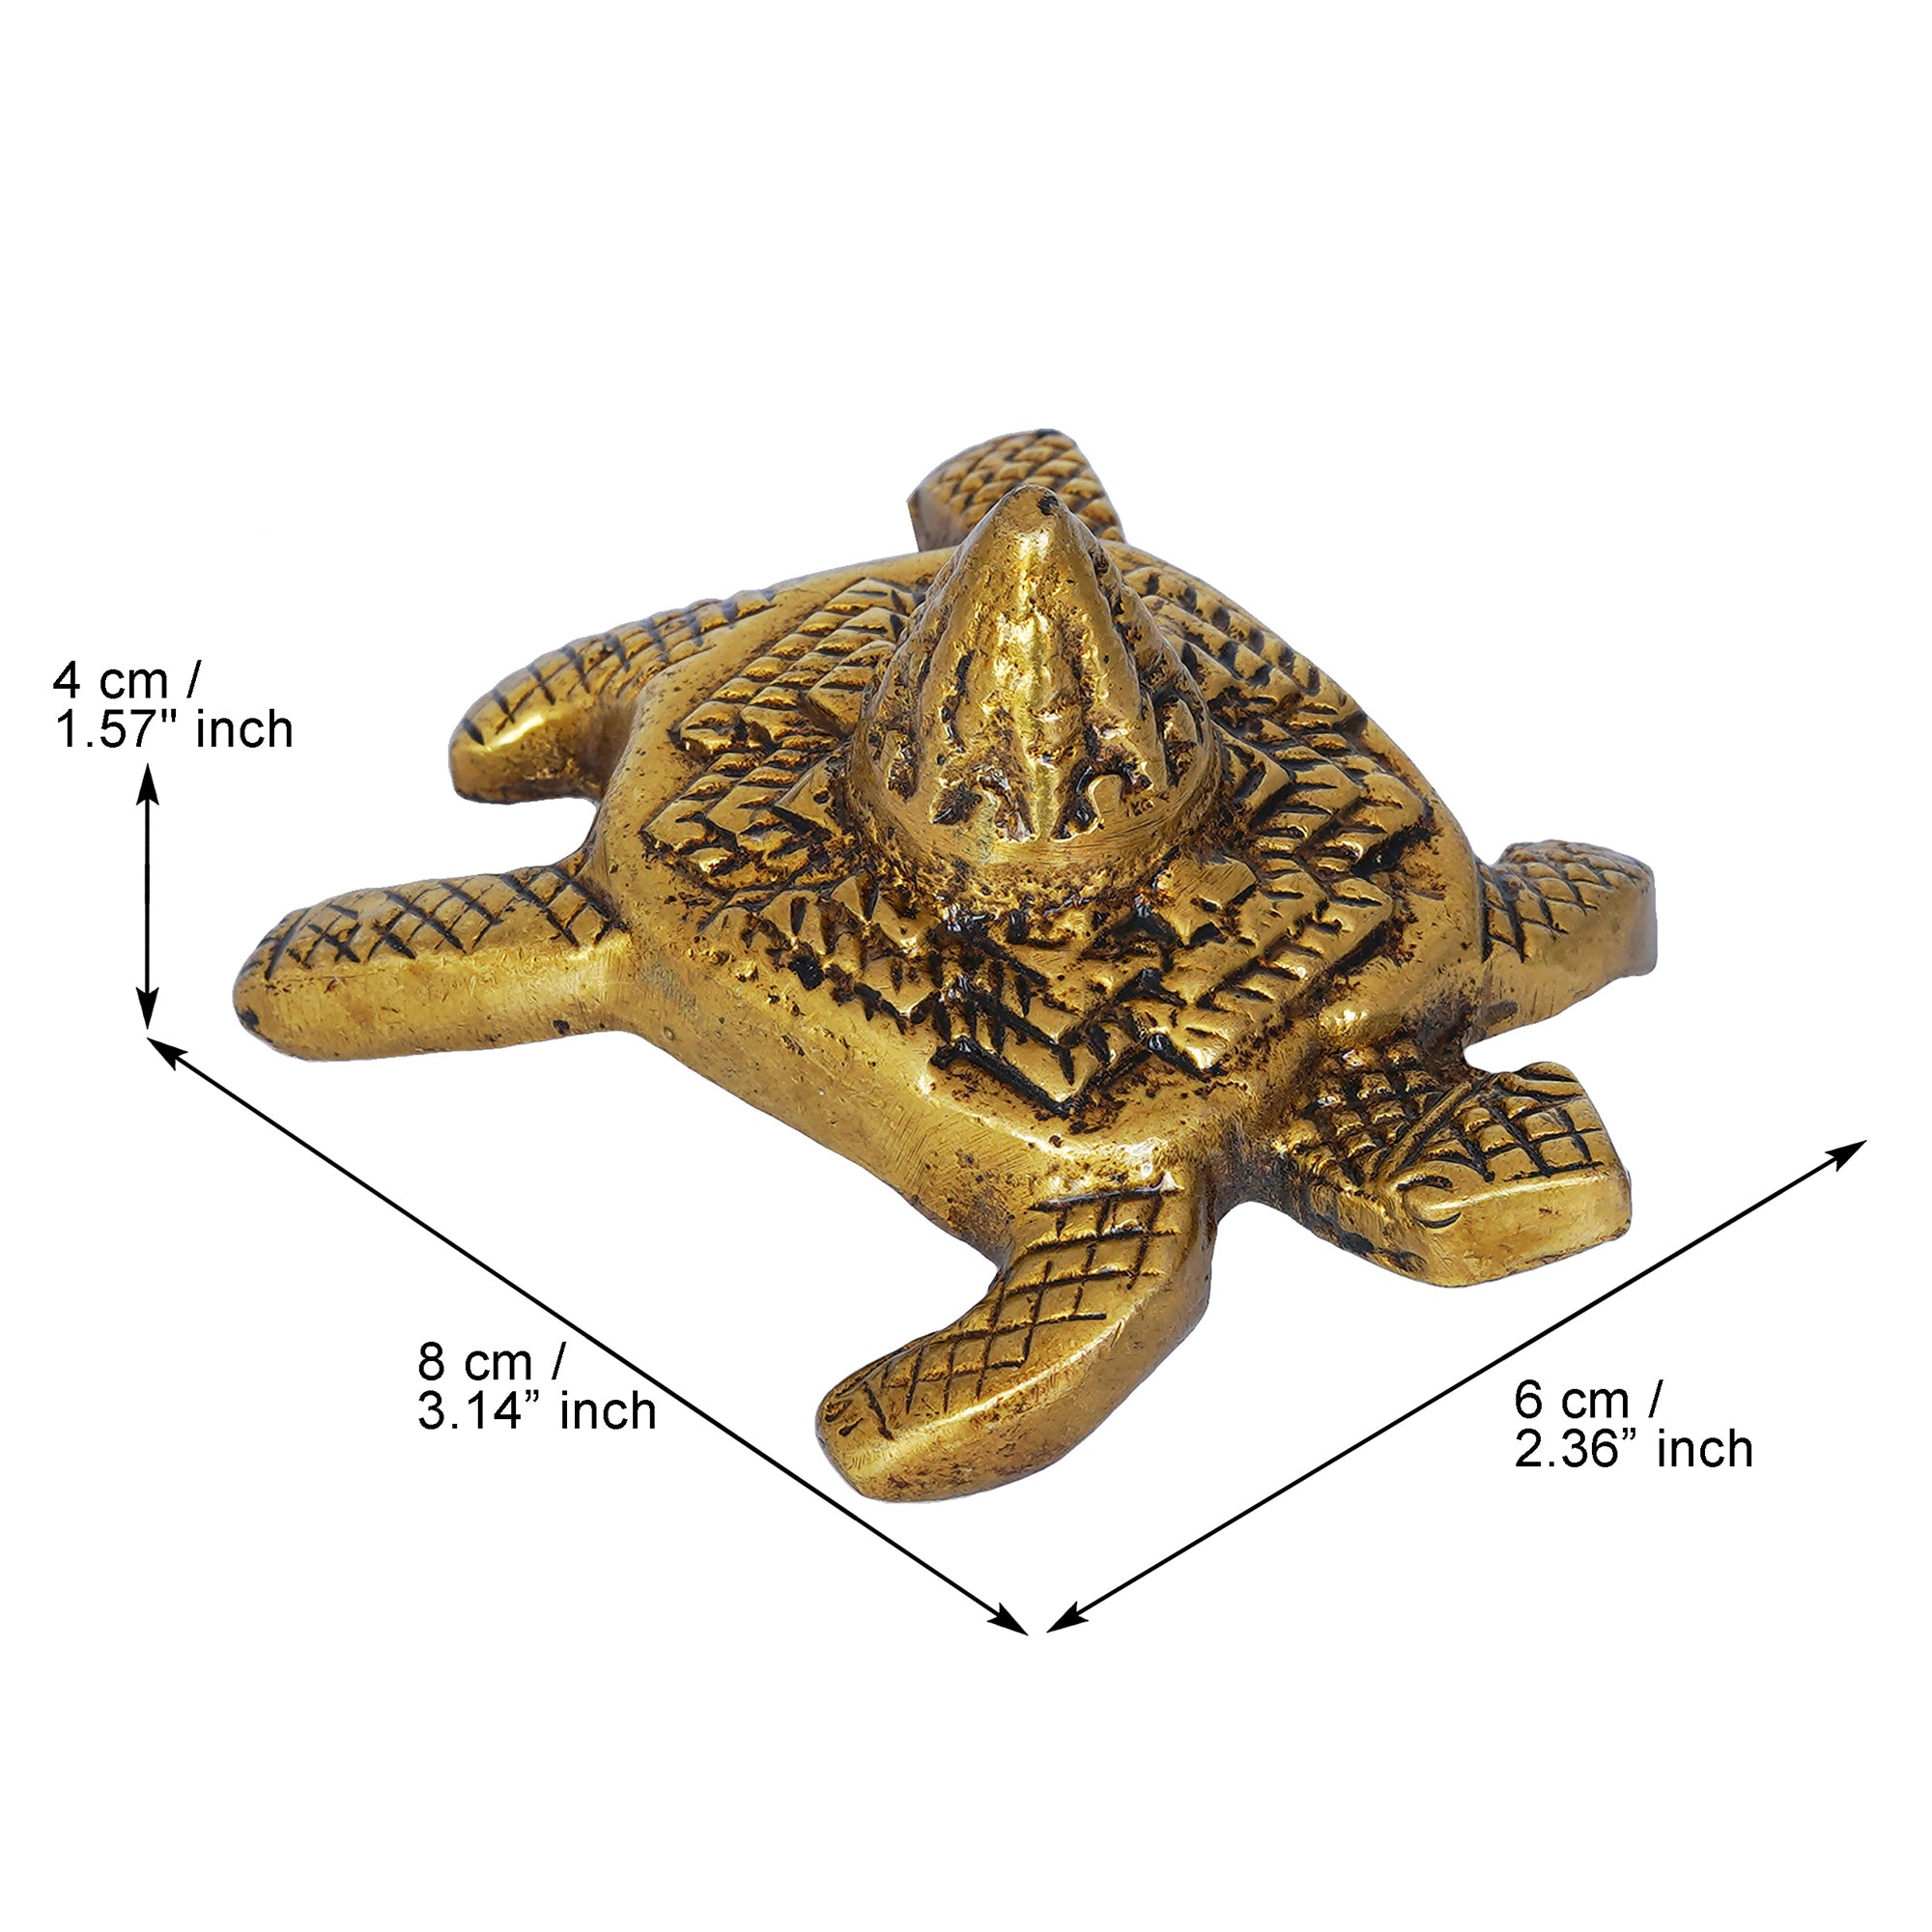 Golden Brass Meru Shree Yantra on Tortoise Statue Showpiece for Home, Office, and Temple - Bring Good Luck - Gift for Festive Occasions 3